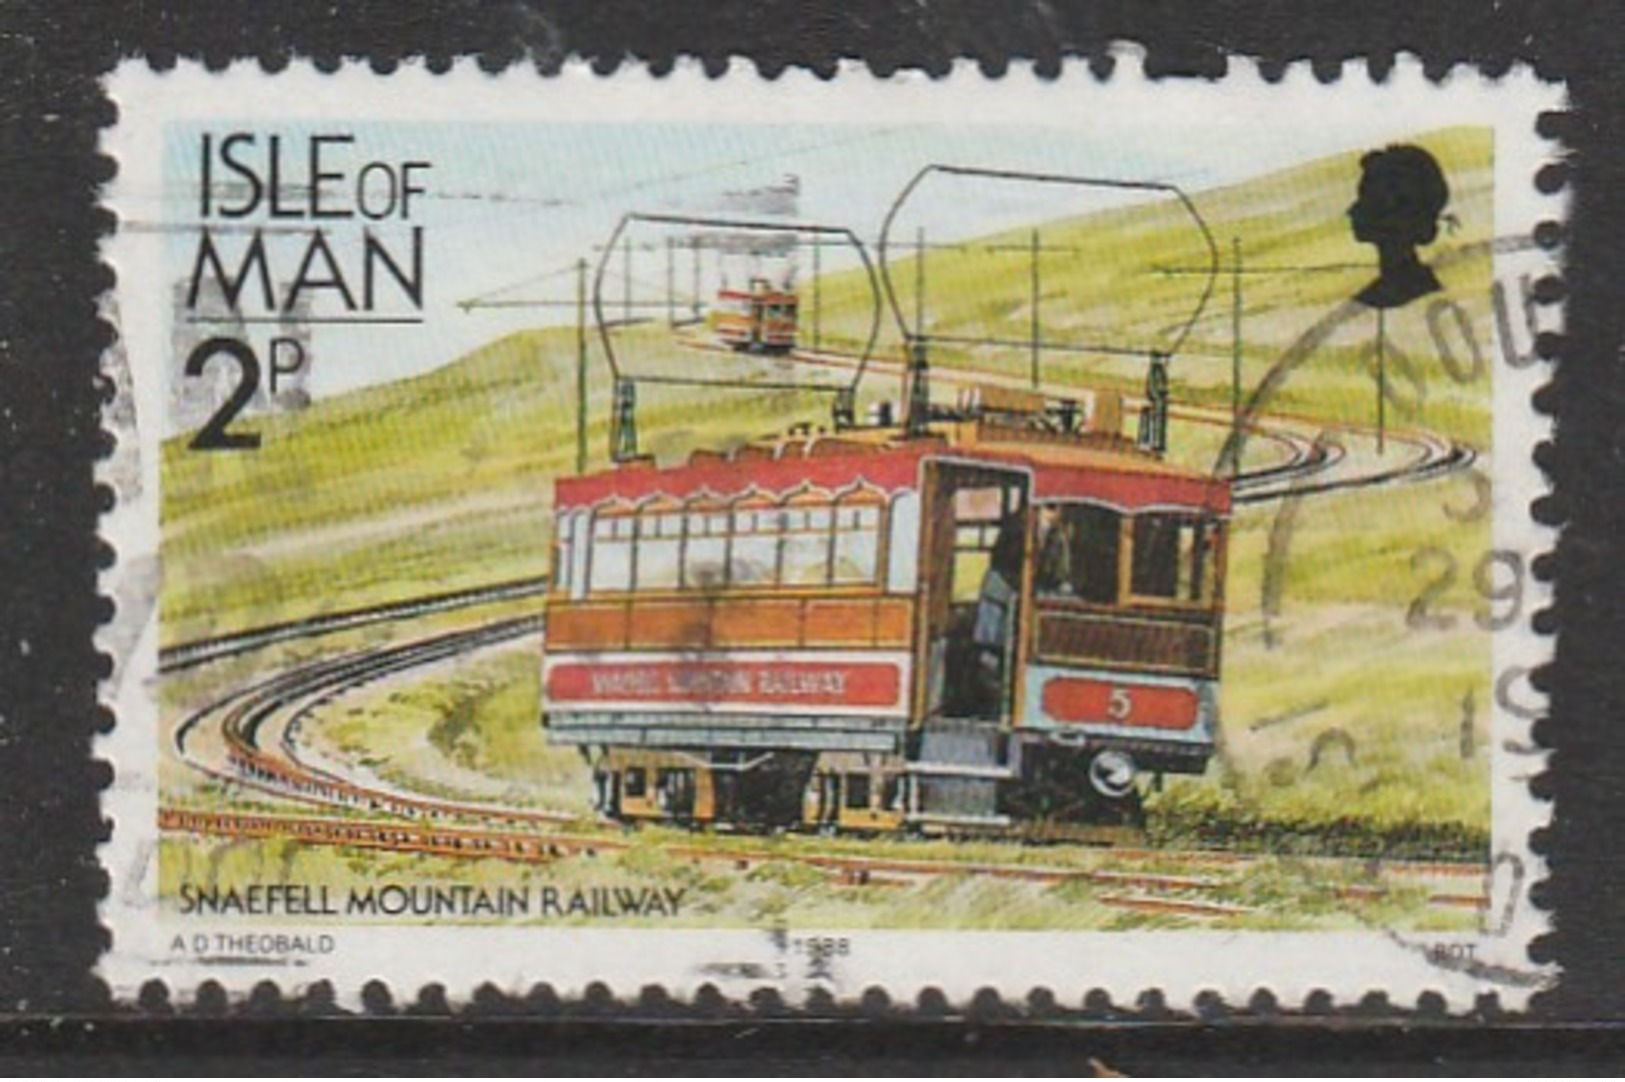 Isle Of Man 1988 Old Tramcars And Trains 2 P Multicolored SW 343 O Used - Isle Of Man